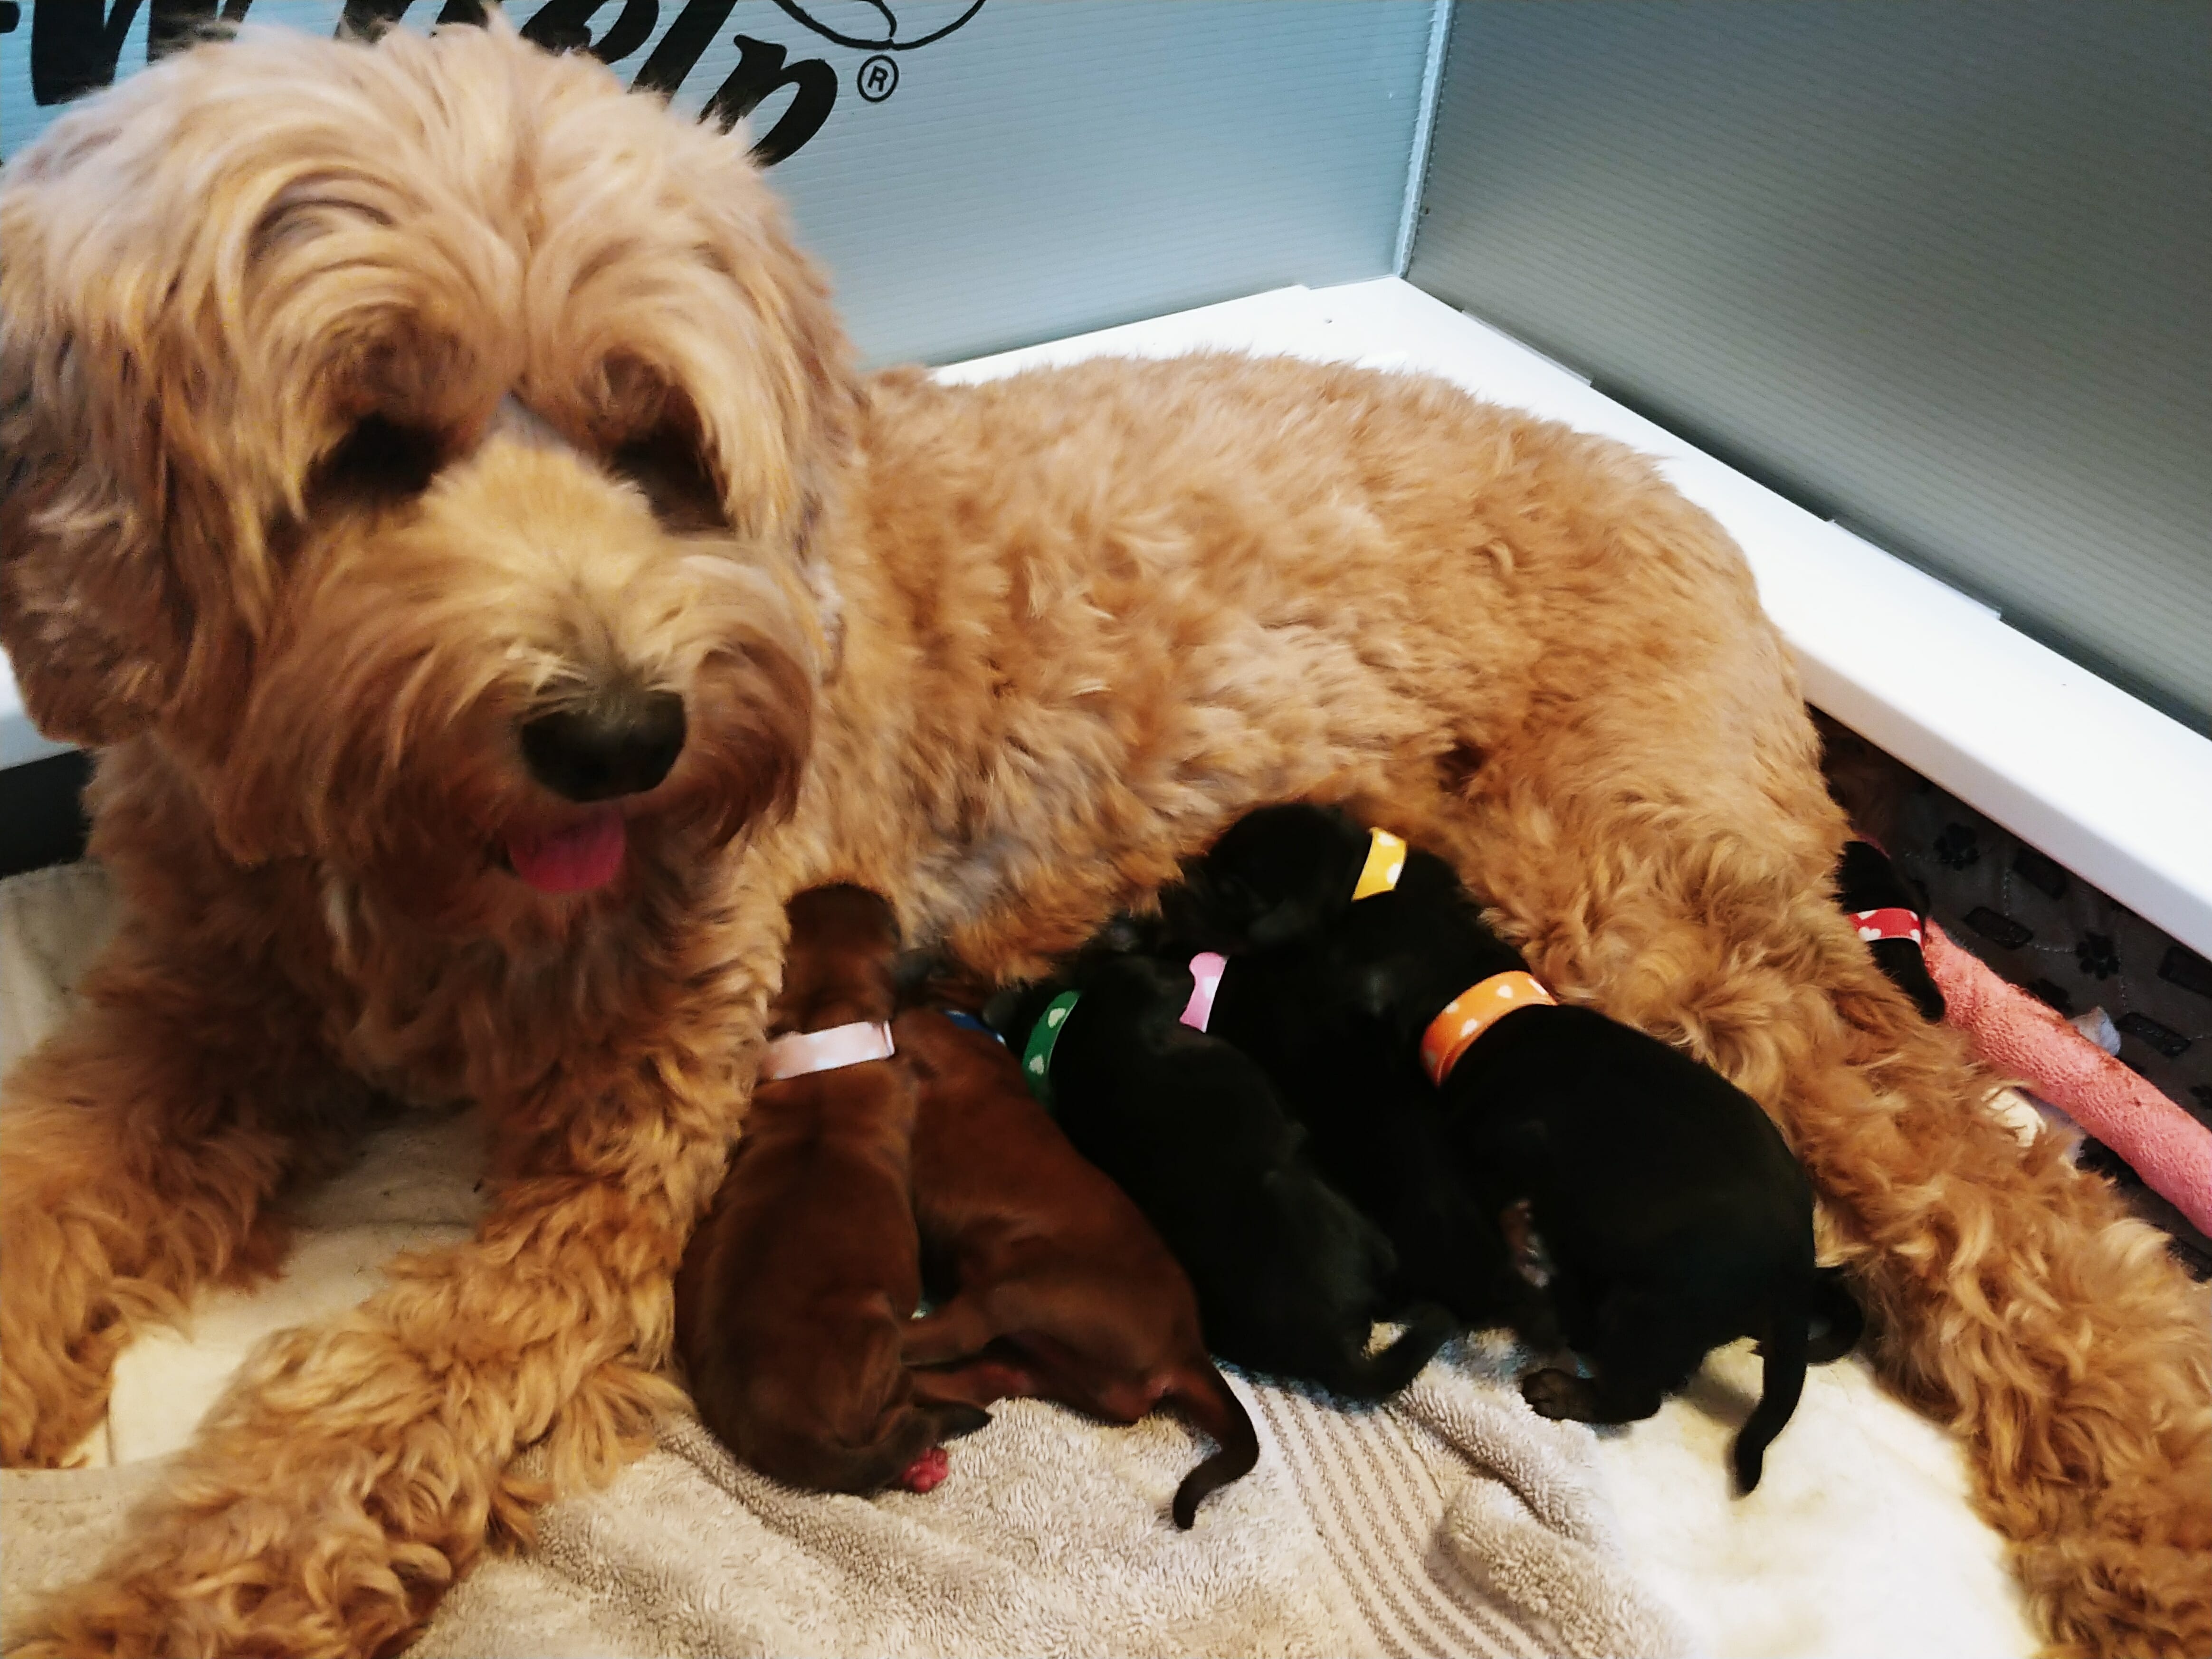 Labradoodle mom feeding 8 puppies, 6 black, 2 red, less than 1 week old.